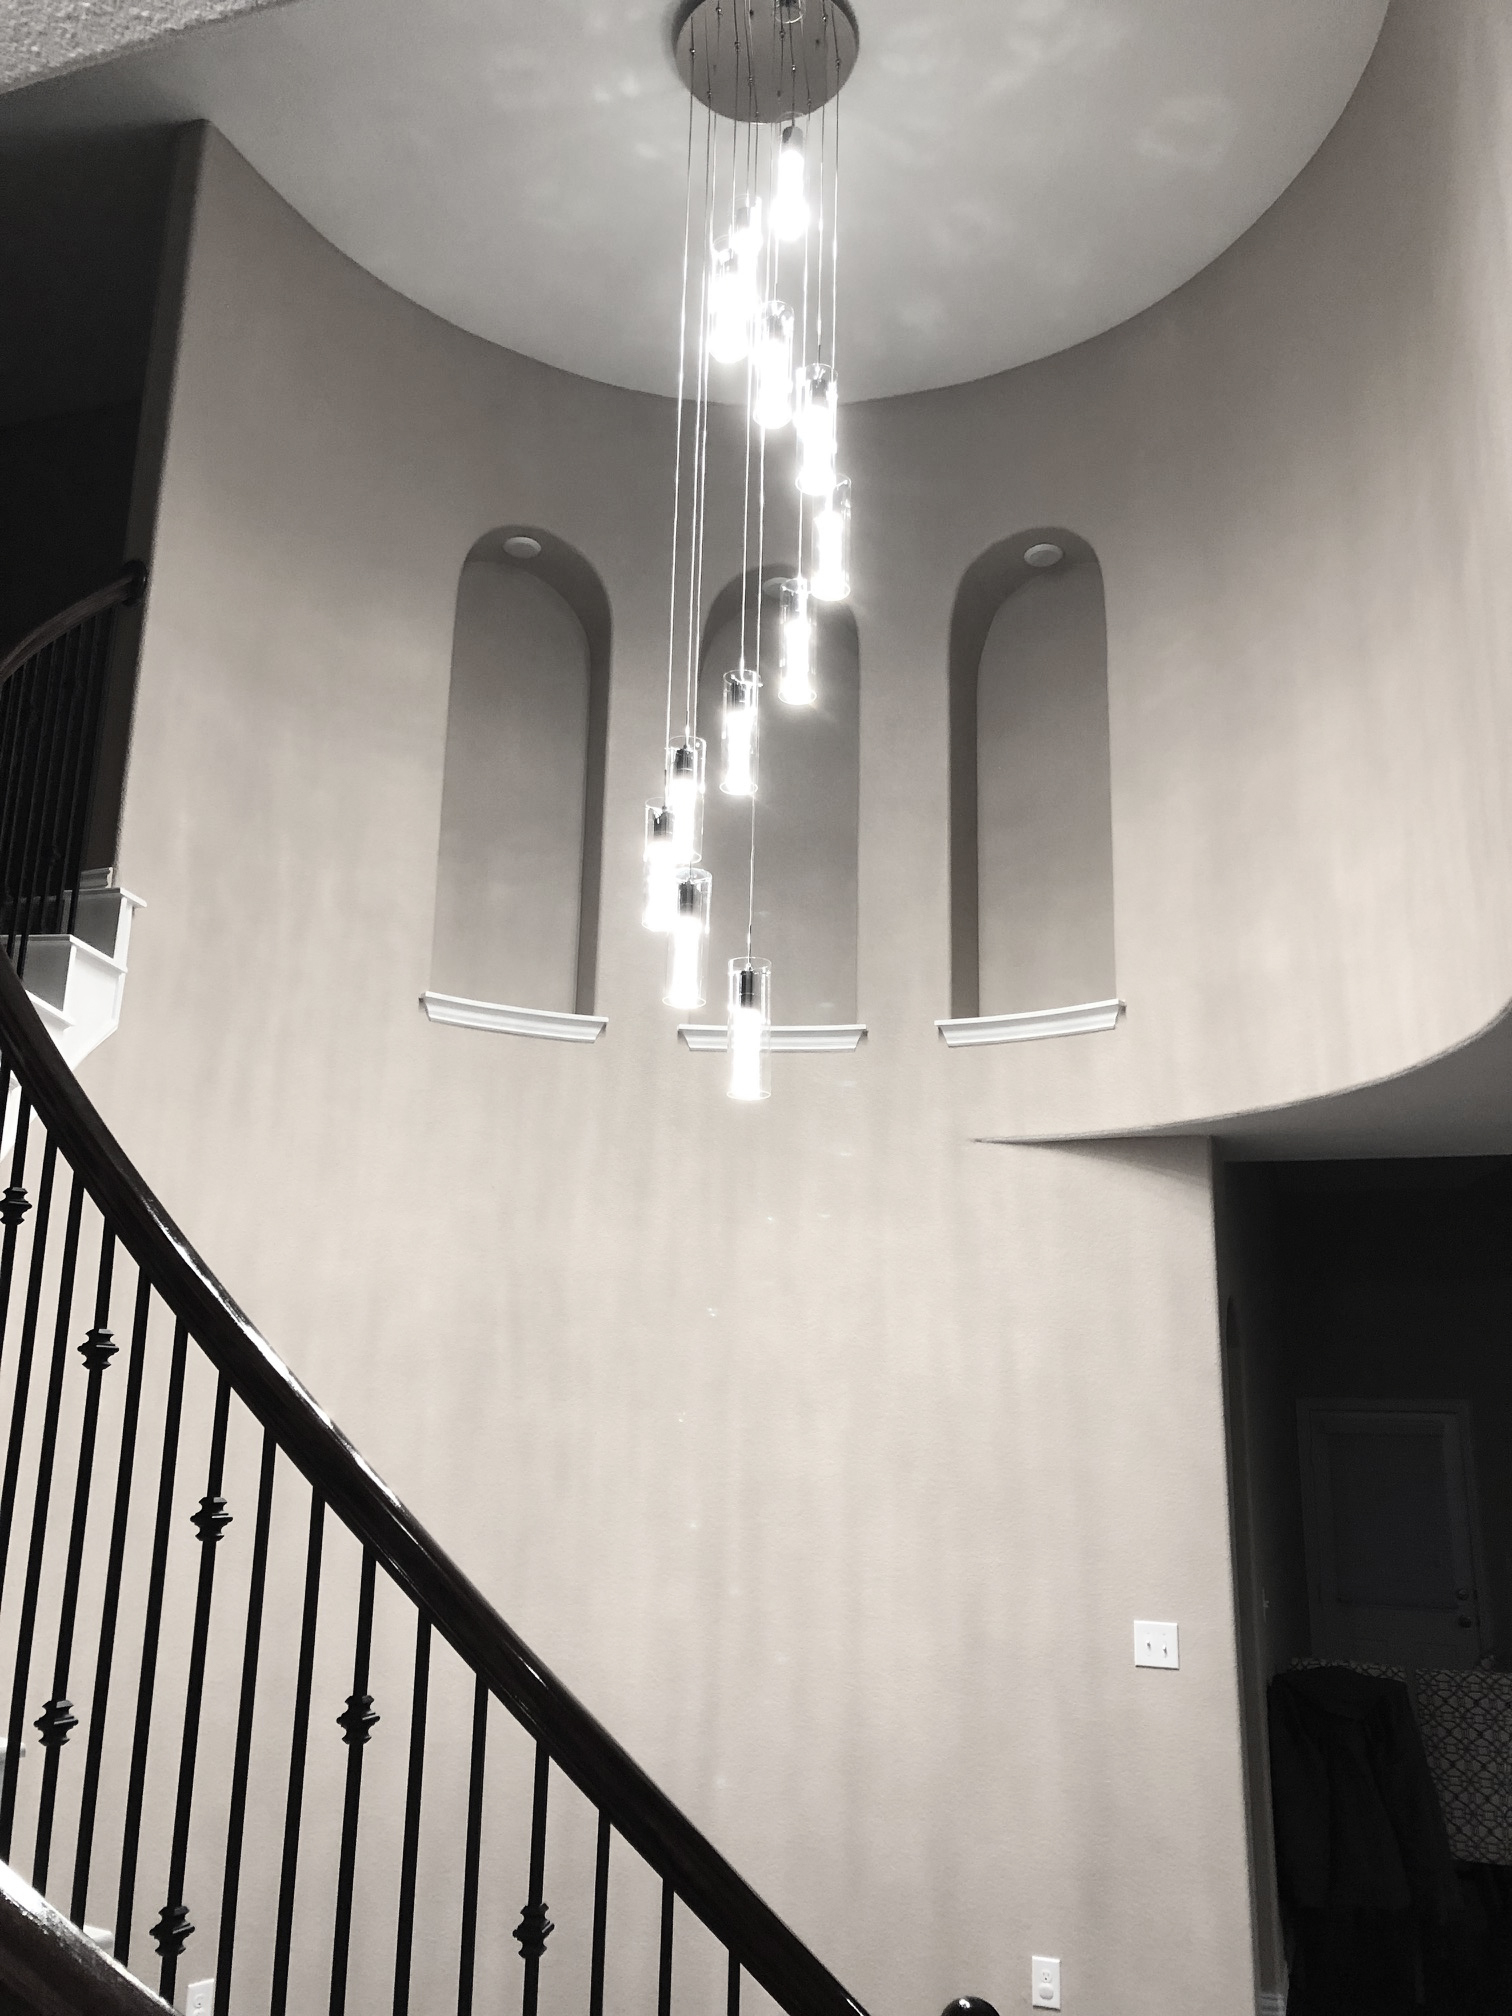 Chandelier with Staircase